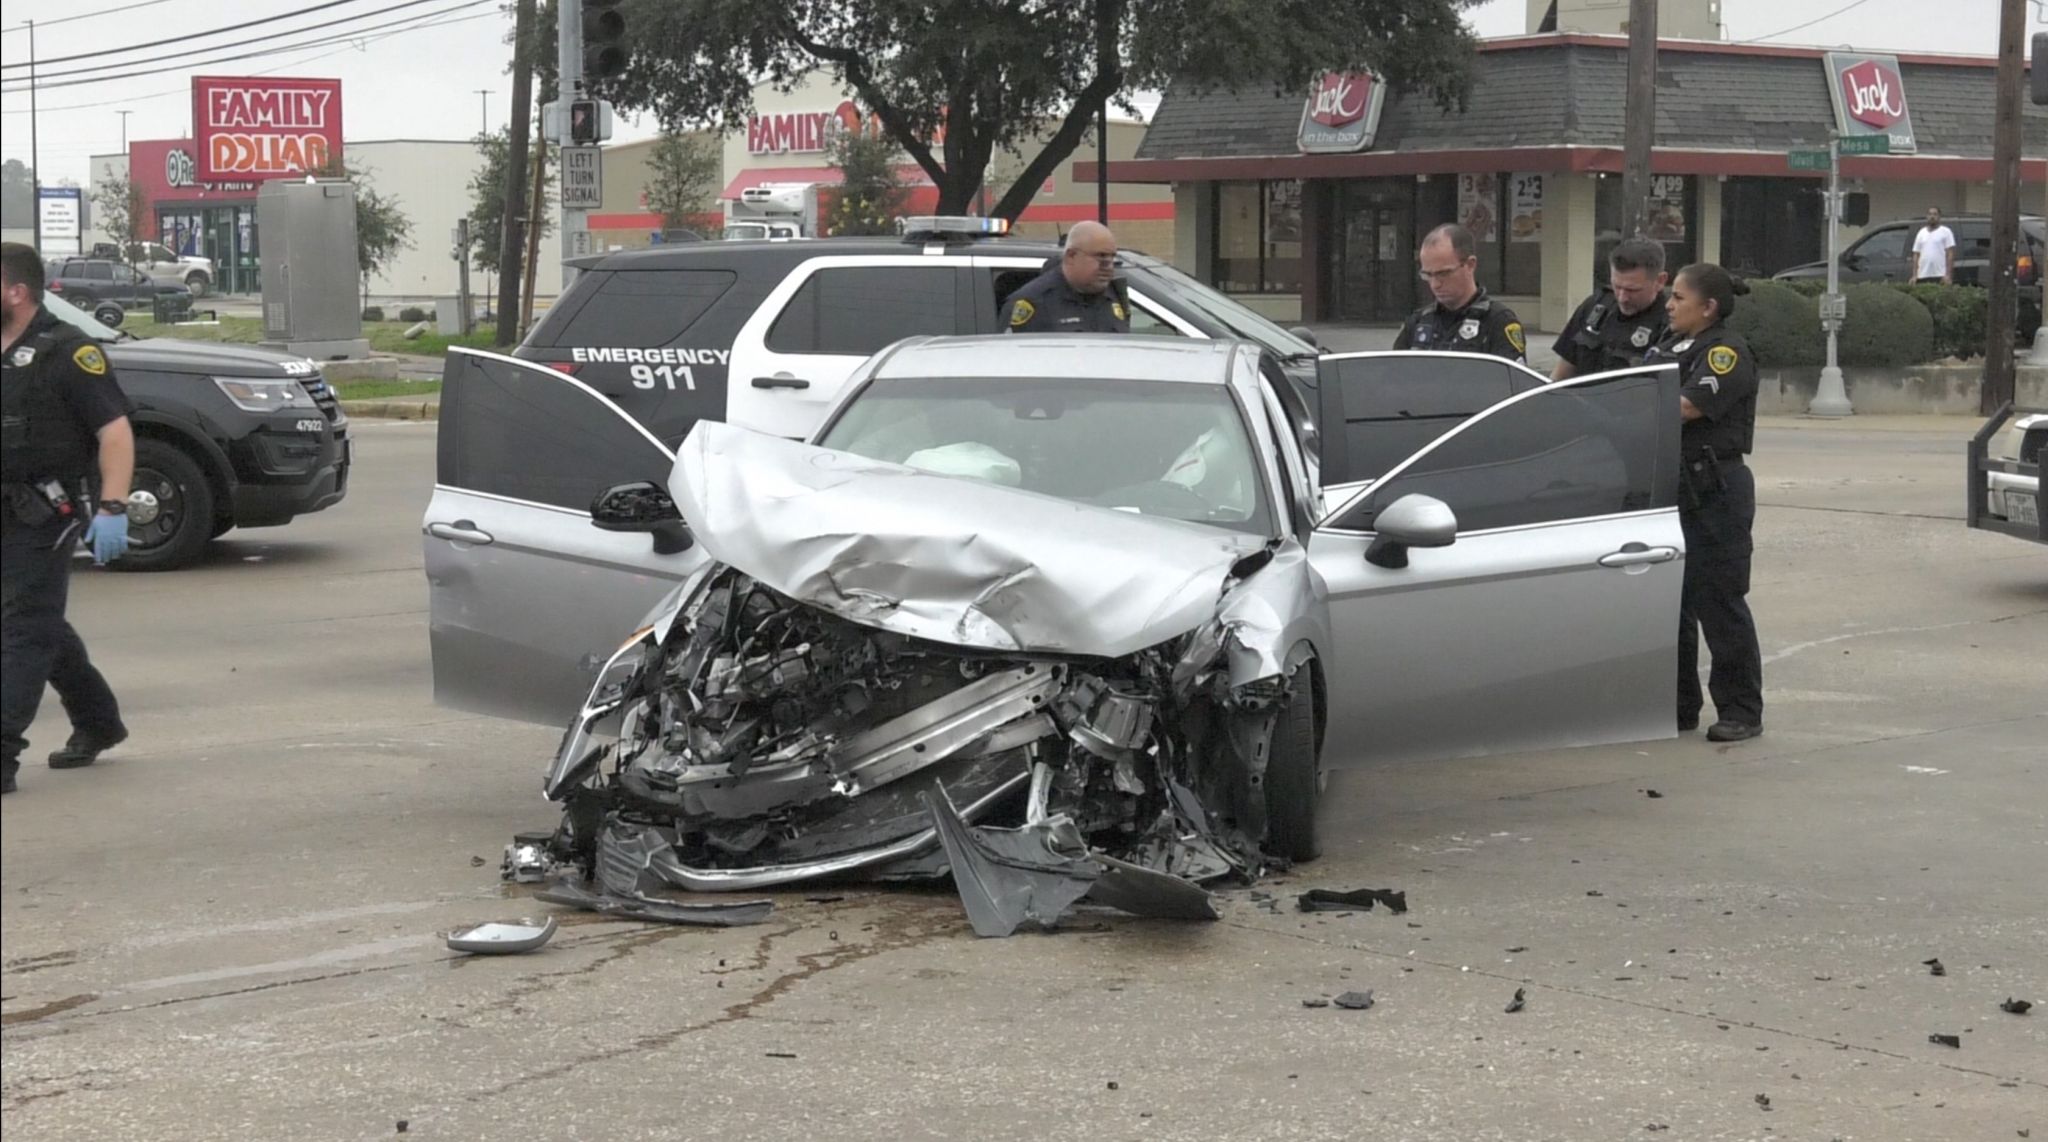 Video 120 Mph Police Chase Ends In Violent Crash In Northeast Houston 4153